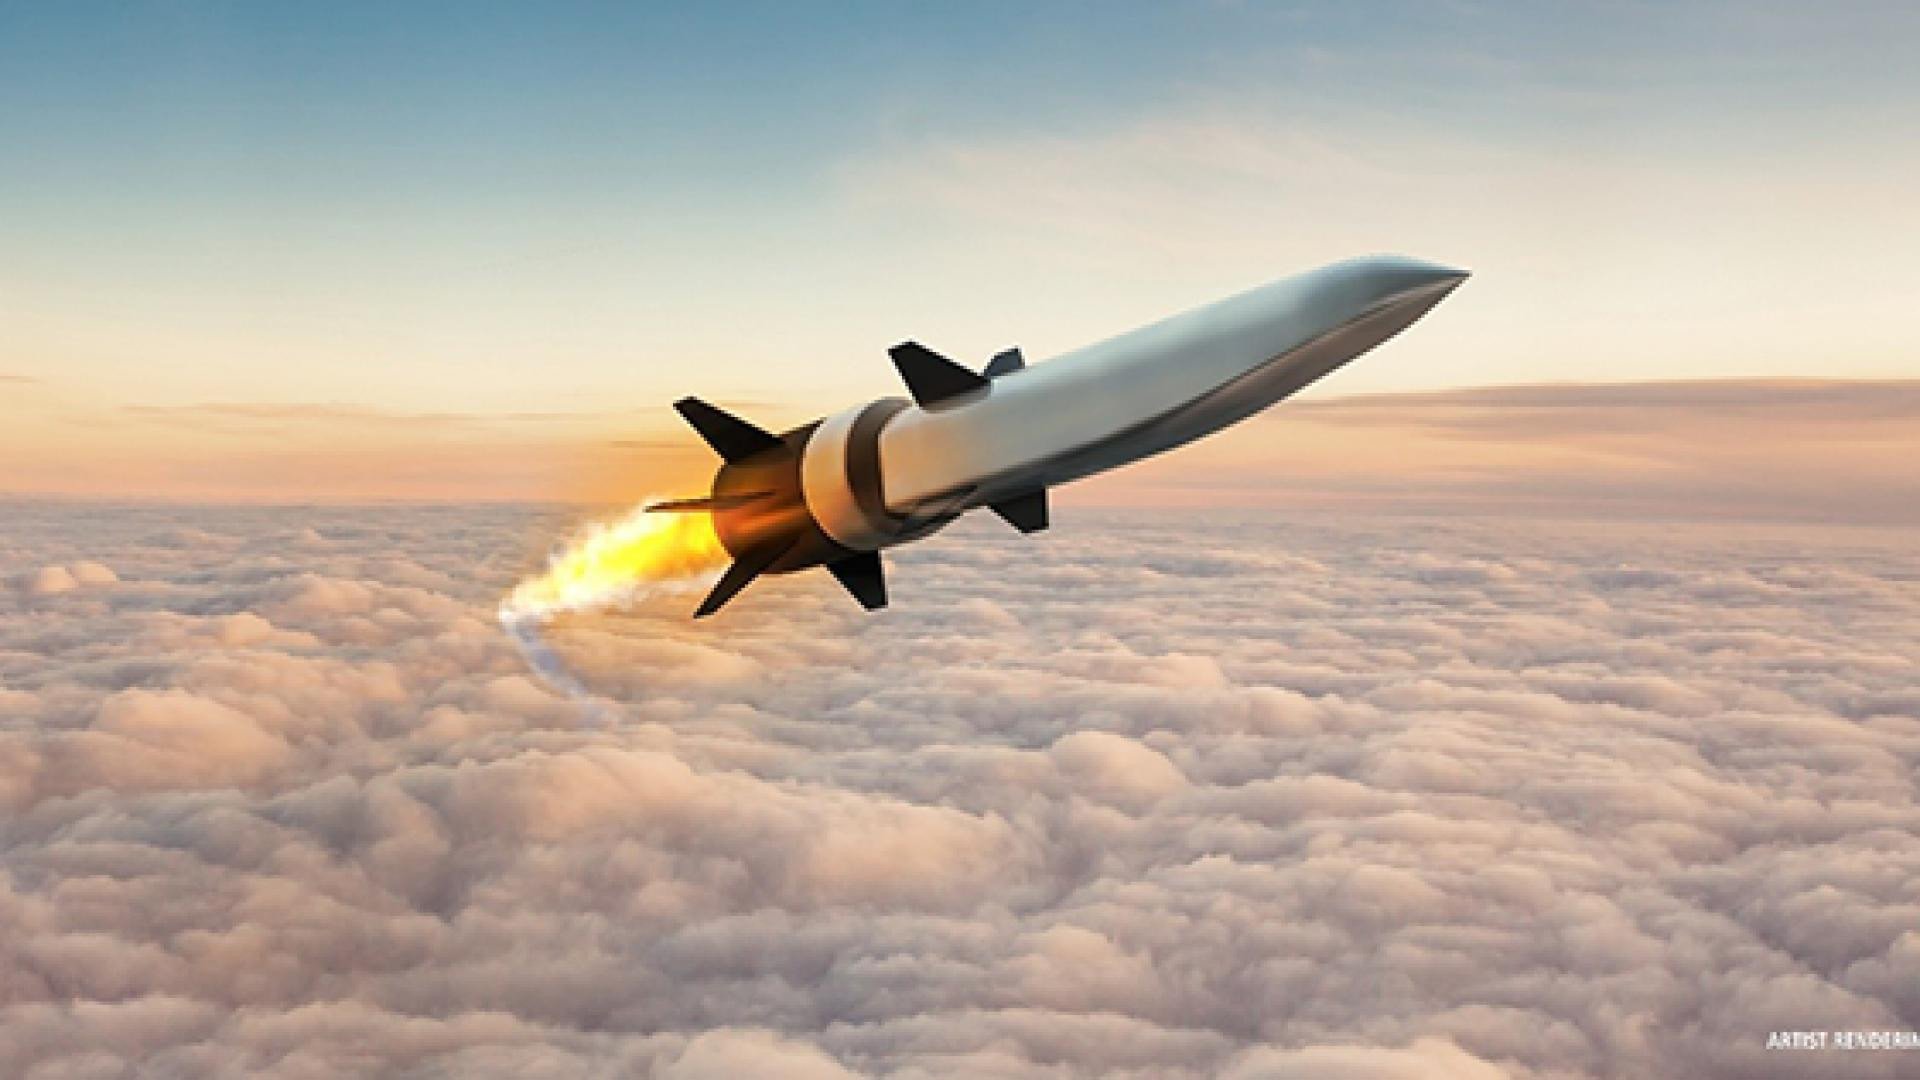 The Hypersonic Air-breathing Weapon Concept, a cruise missile, is being developed for the US Air Force. Image: Raytheon Missiles & Defense